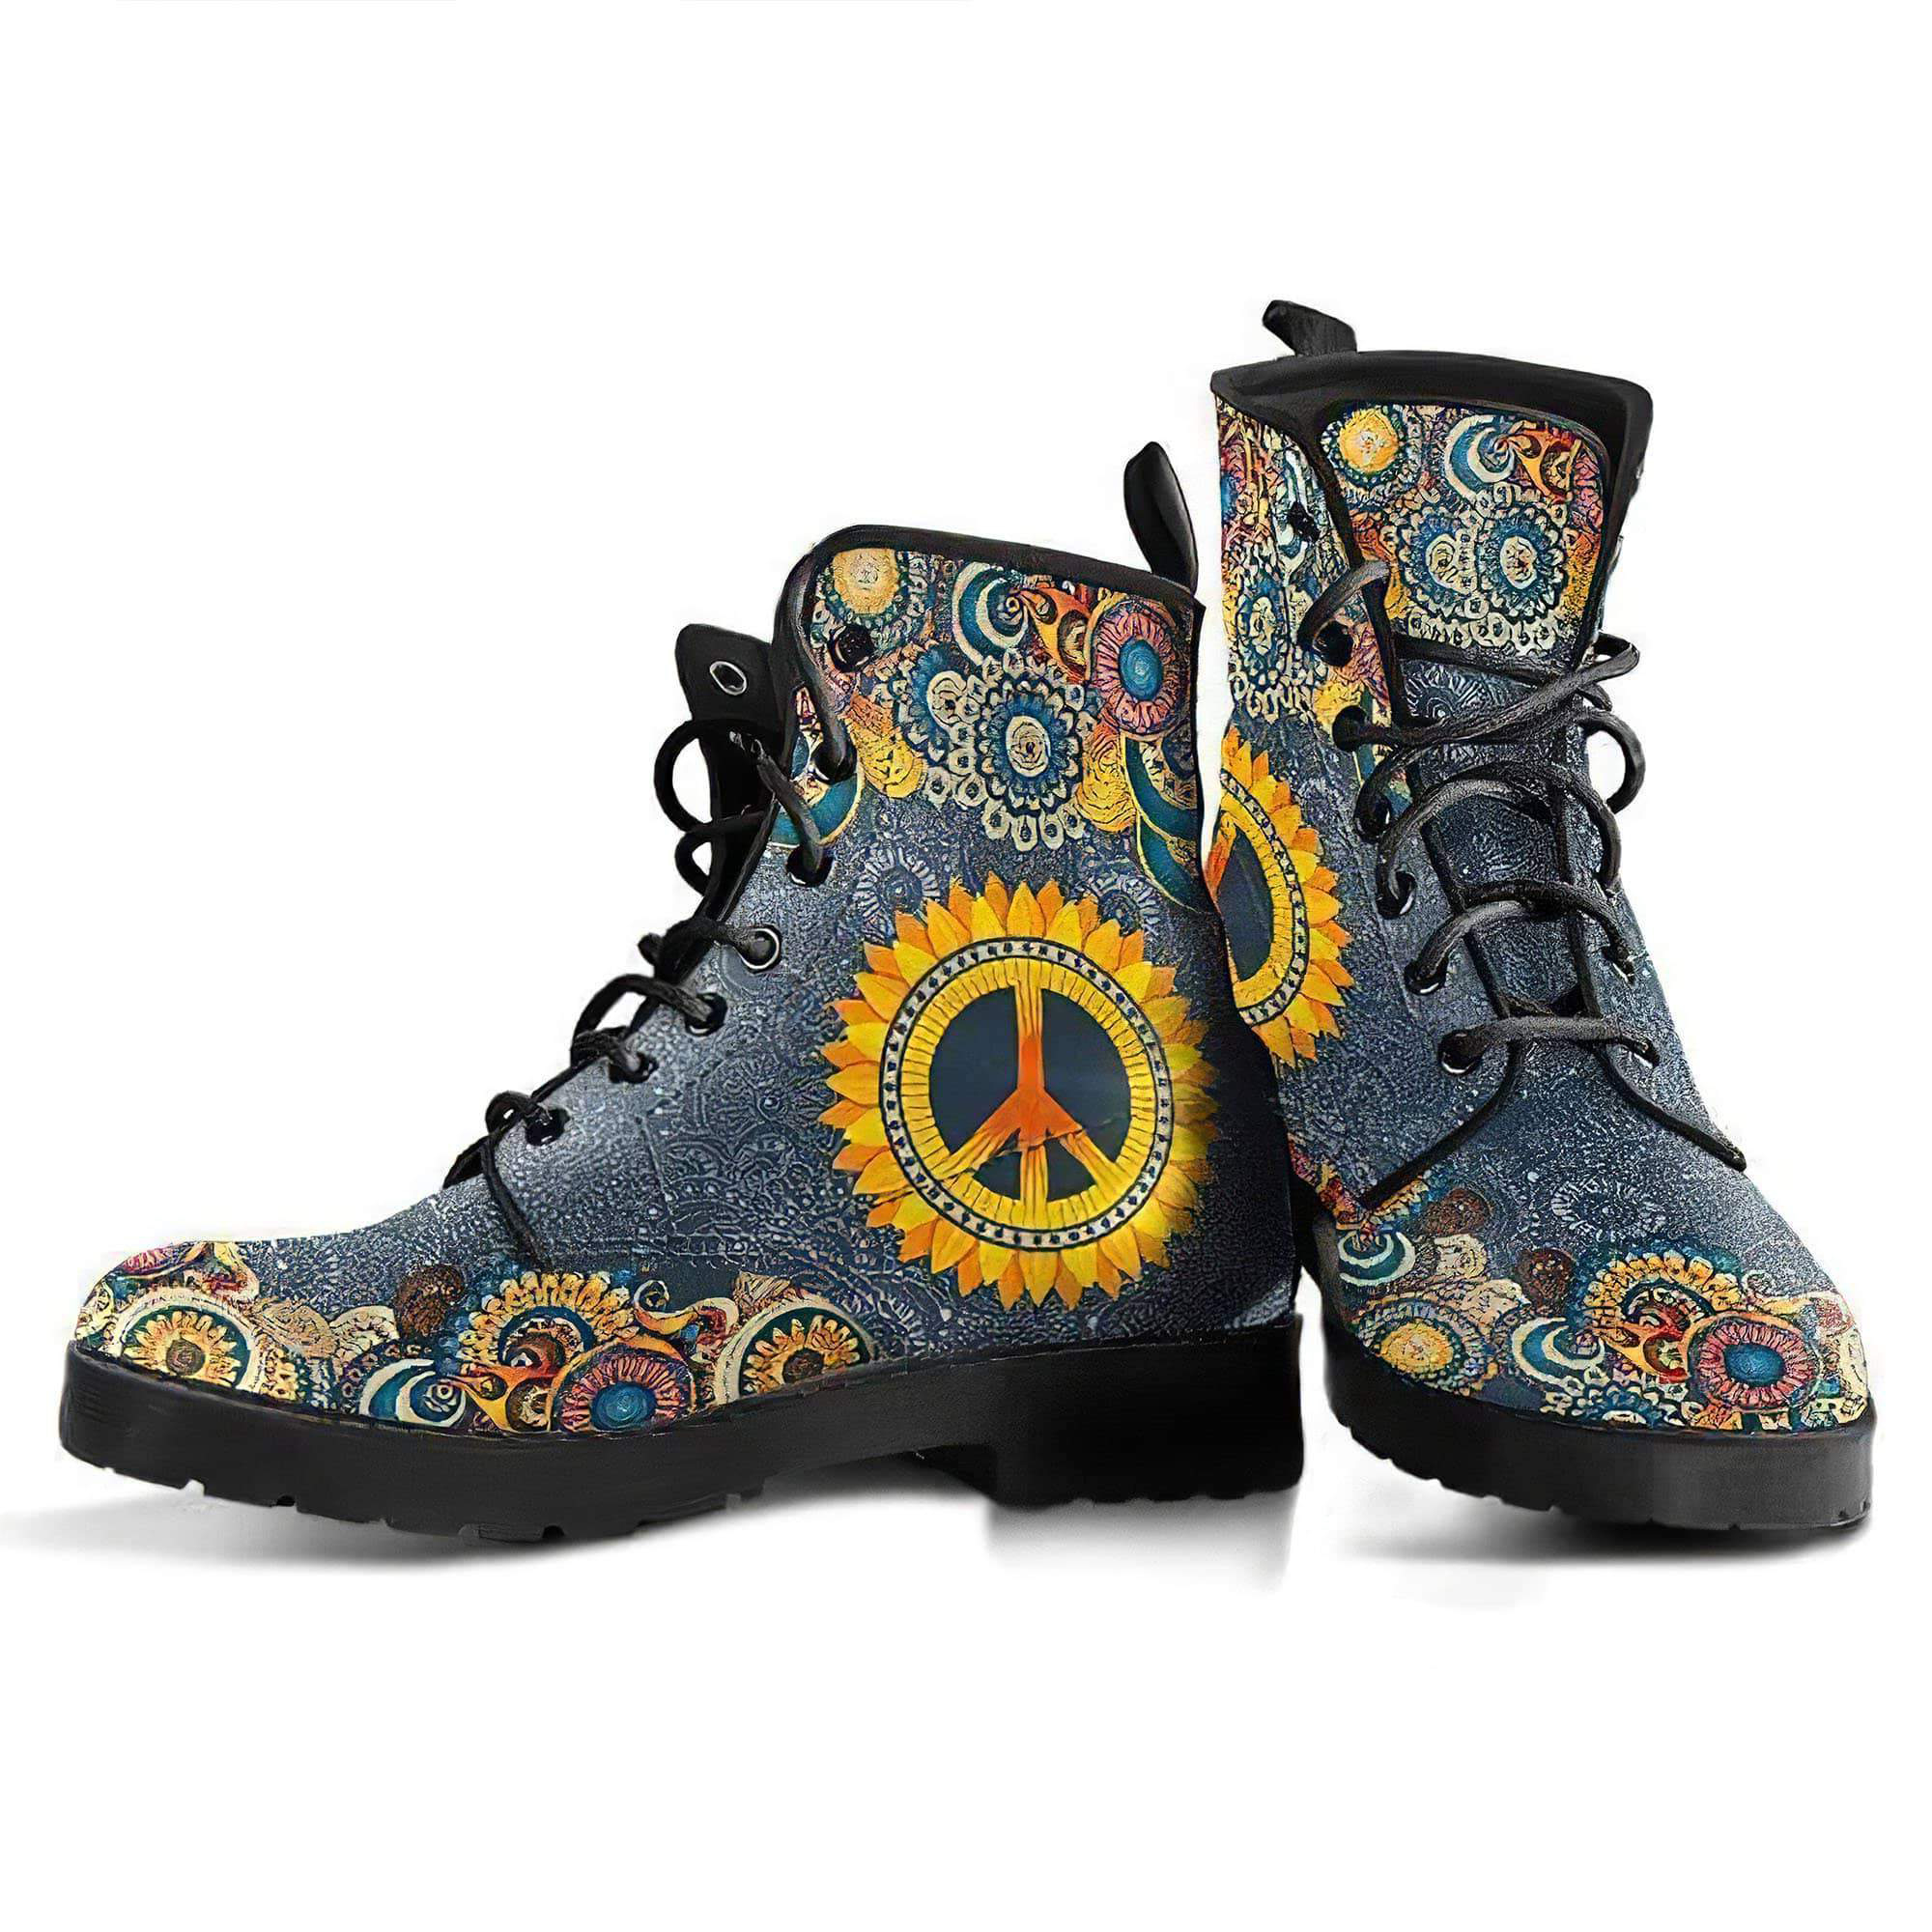 peace-mandala-handcrafted-boots-women-s-leather-boots-12051928023101.jpg